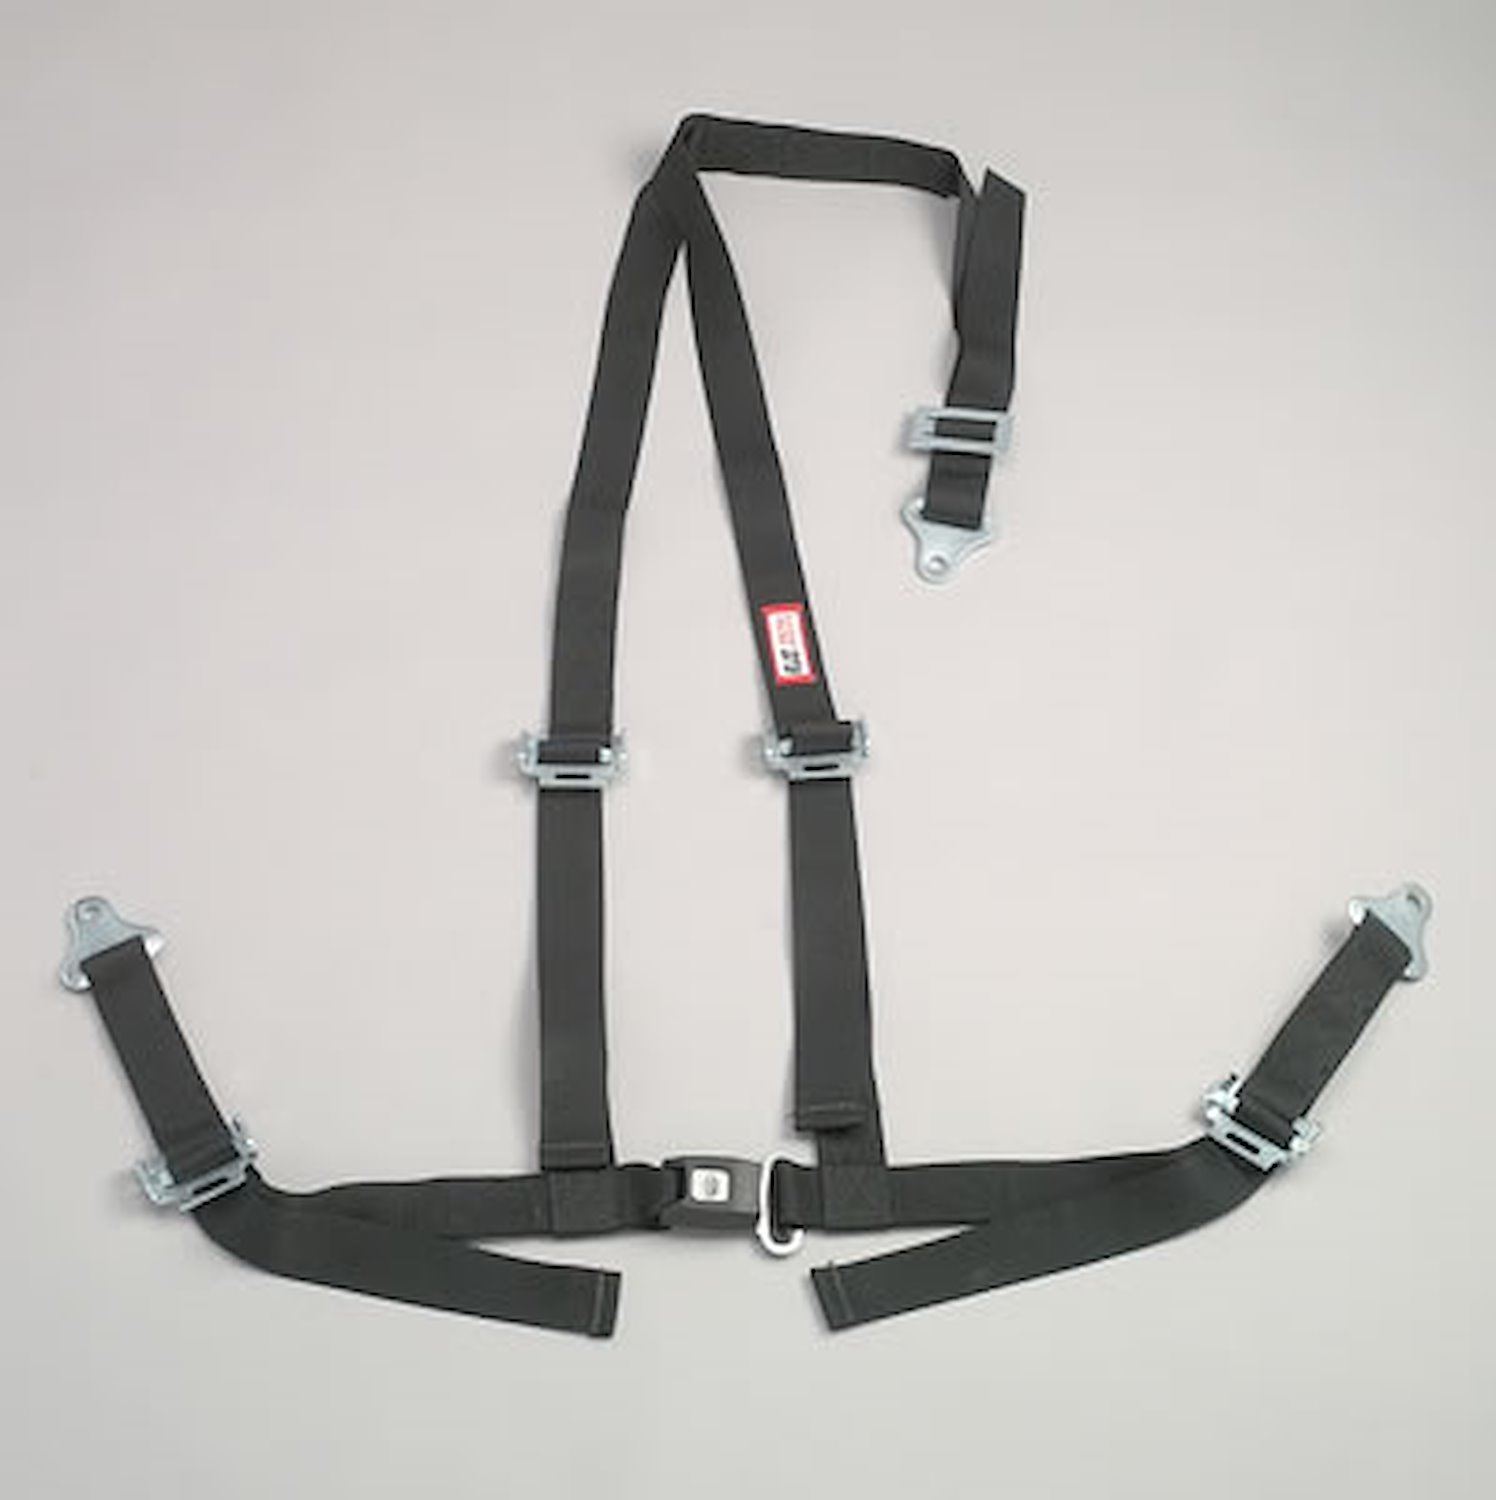 NON-SFI B&T HARNESS 2 PULL DOWN Lap Belt SNAP 2 S.H. INDIVIDUAL FLOOR Mount WRAP/SNAP YELLOW